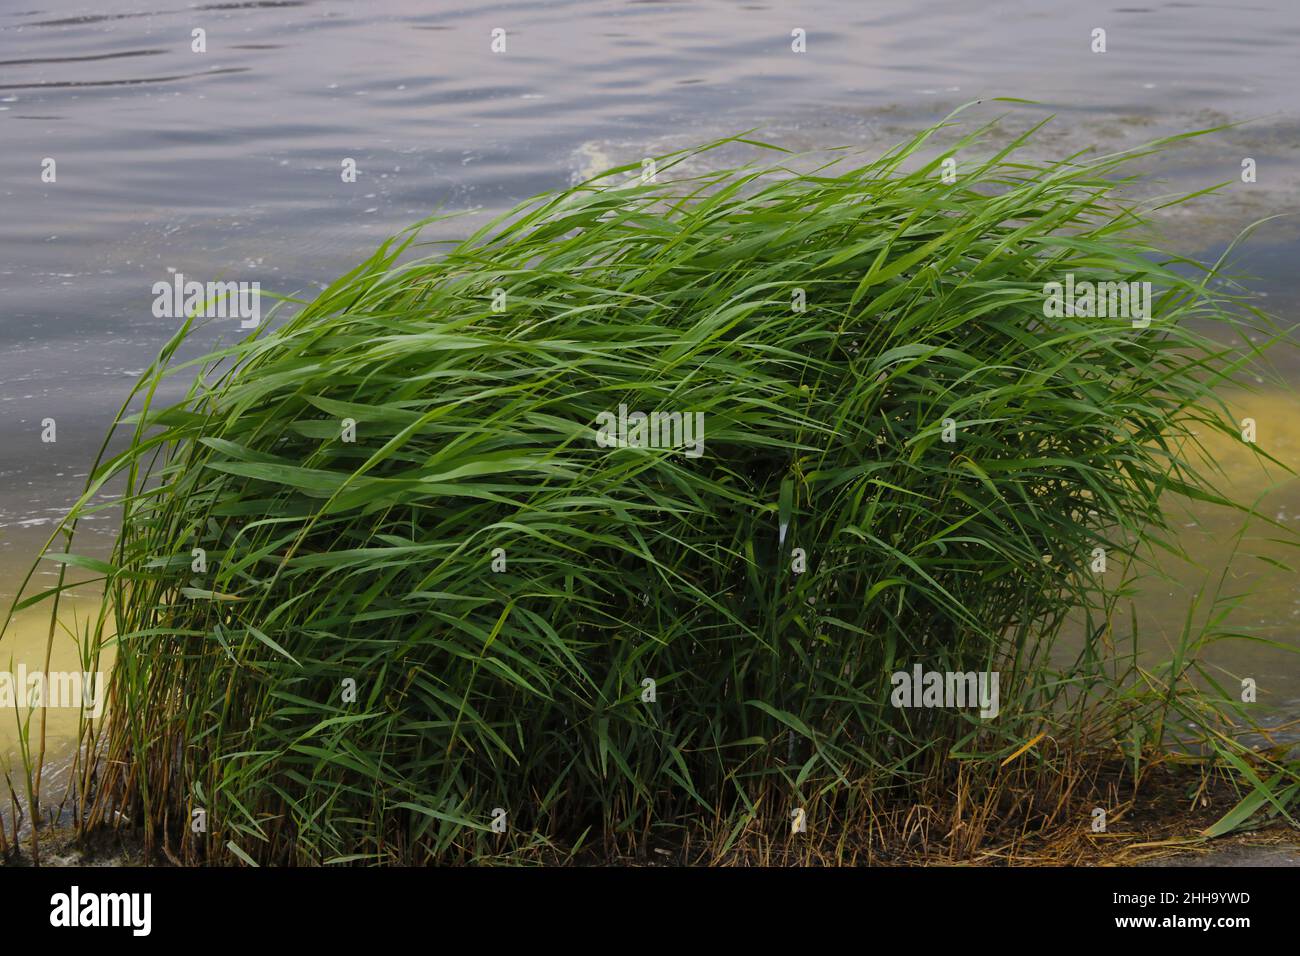 Out of focus. Green young bushes on the shore of a lake or river Stock Photo